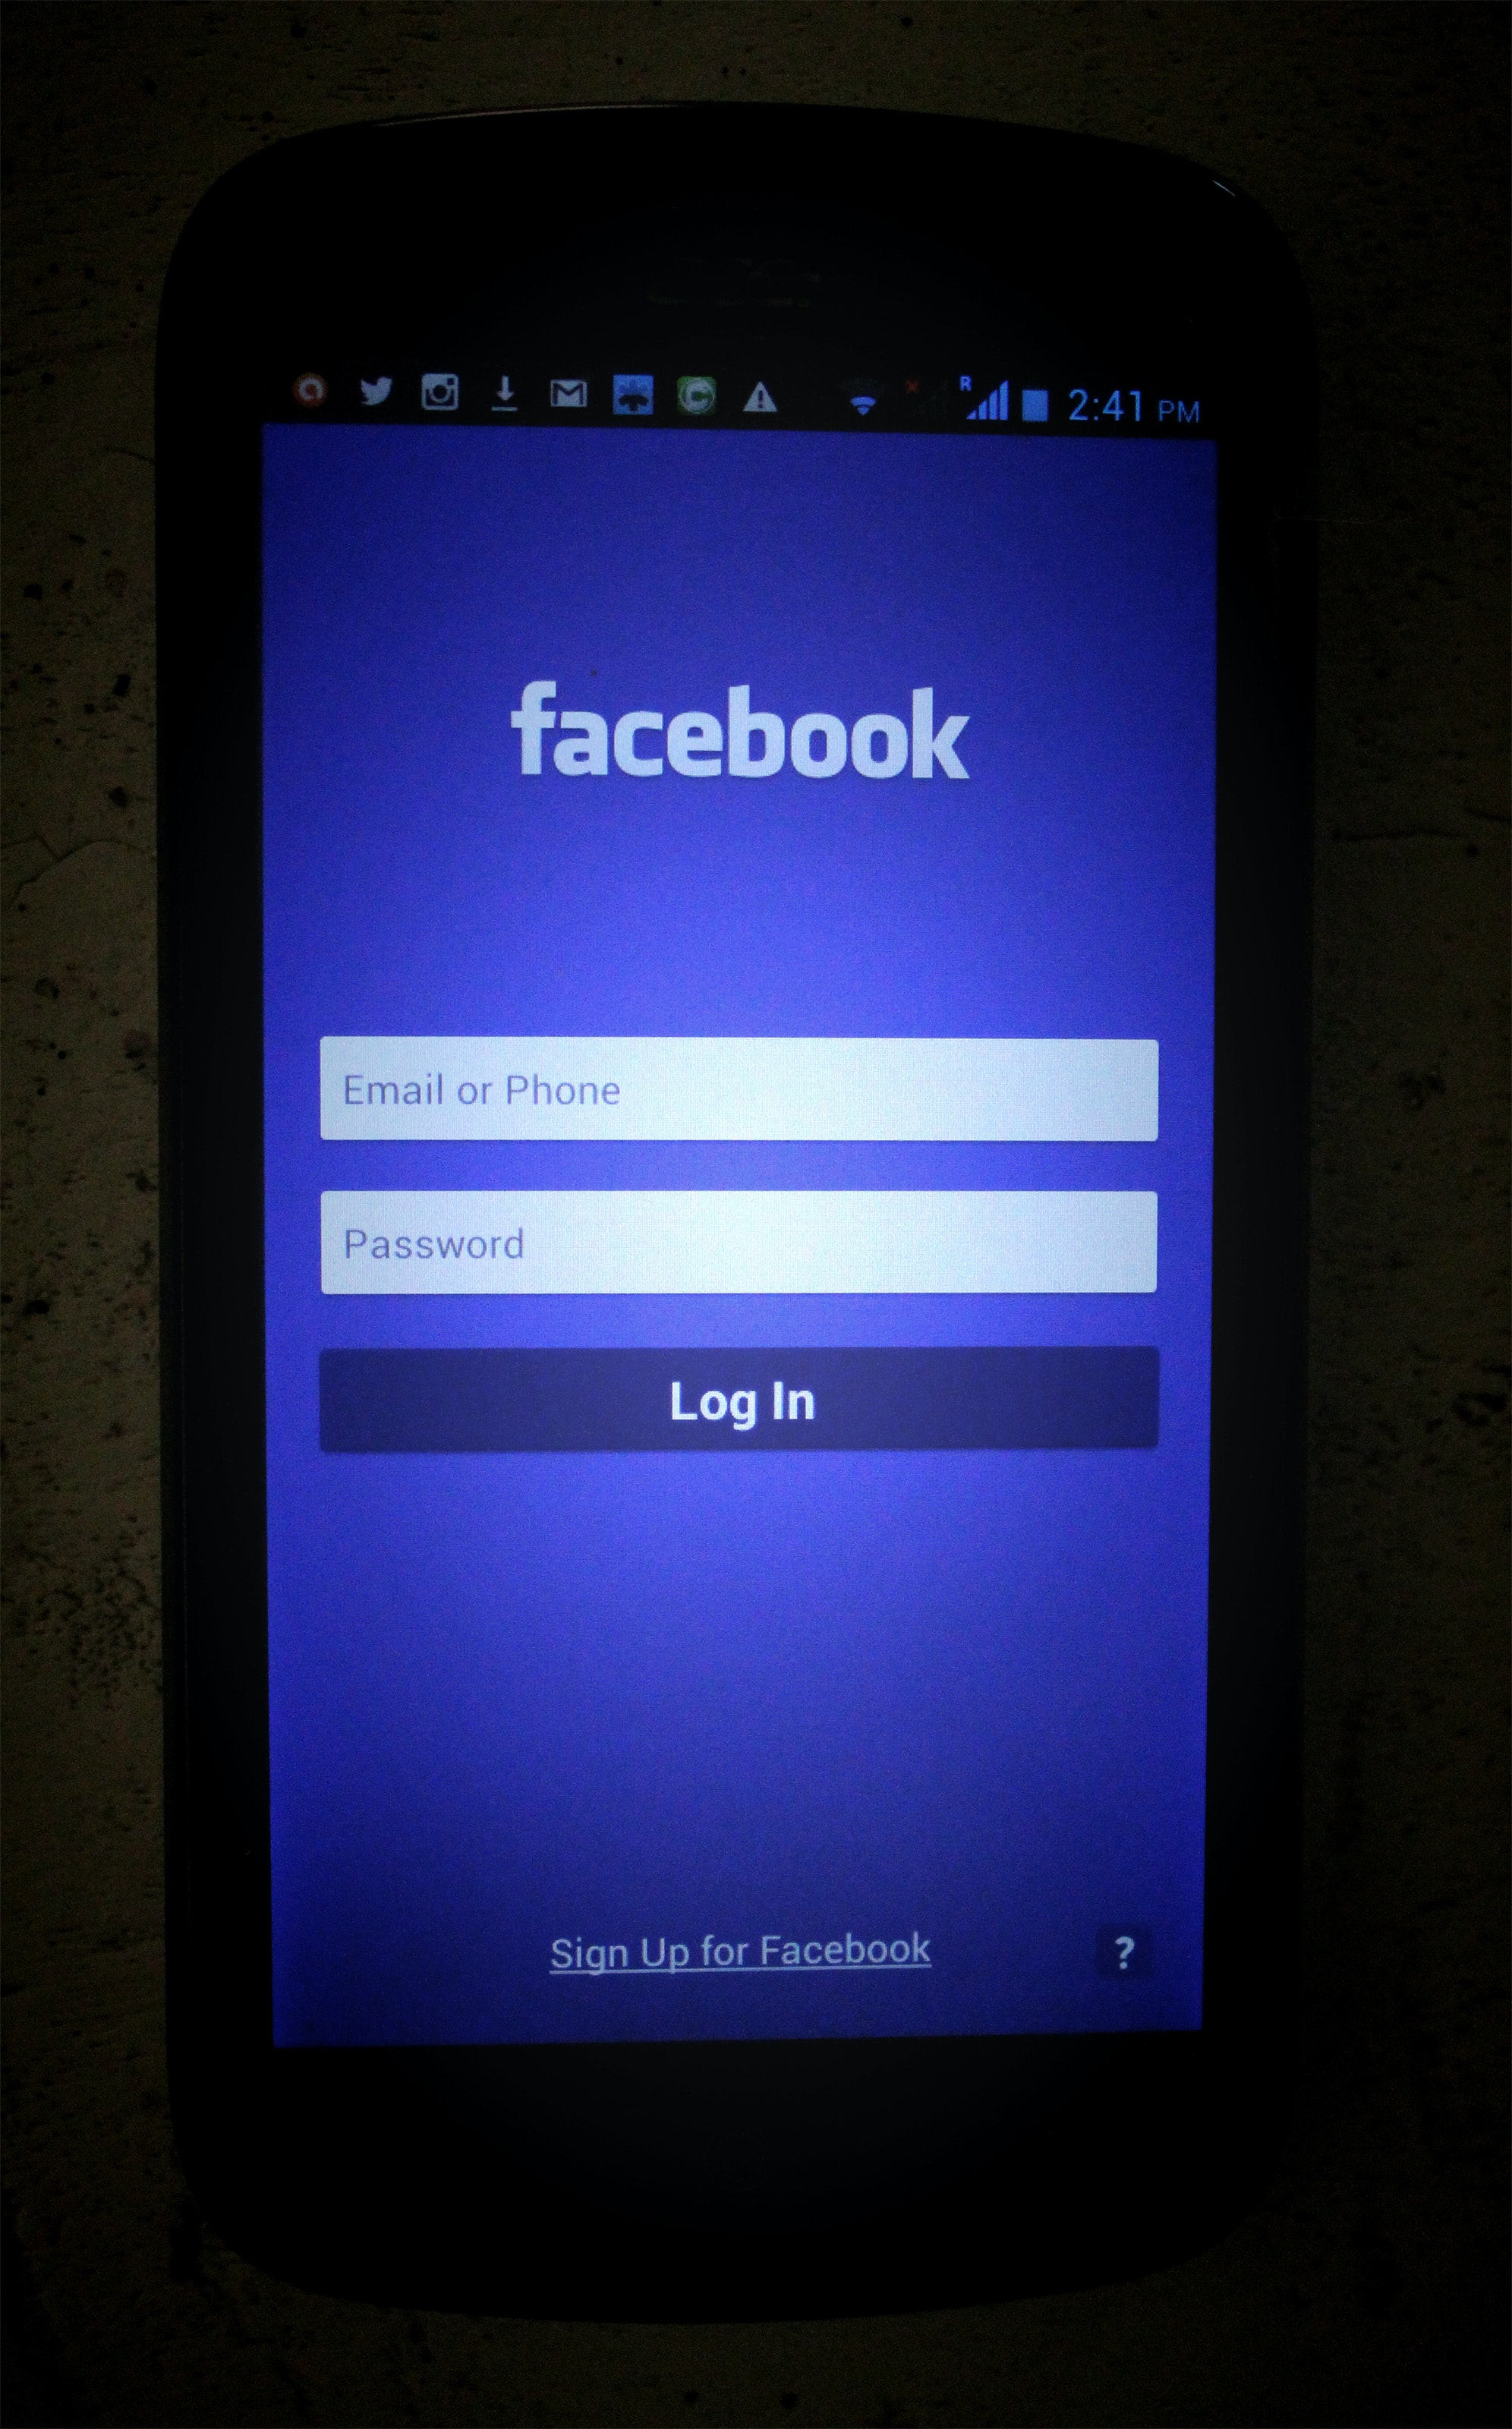 Facebook took its report moderation system more seriously